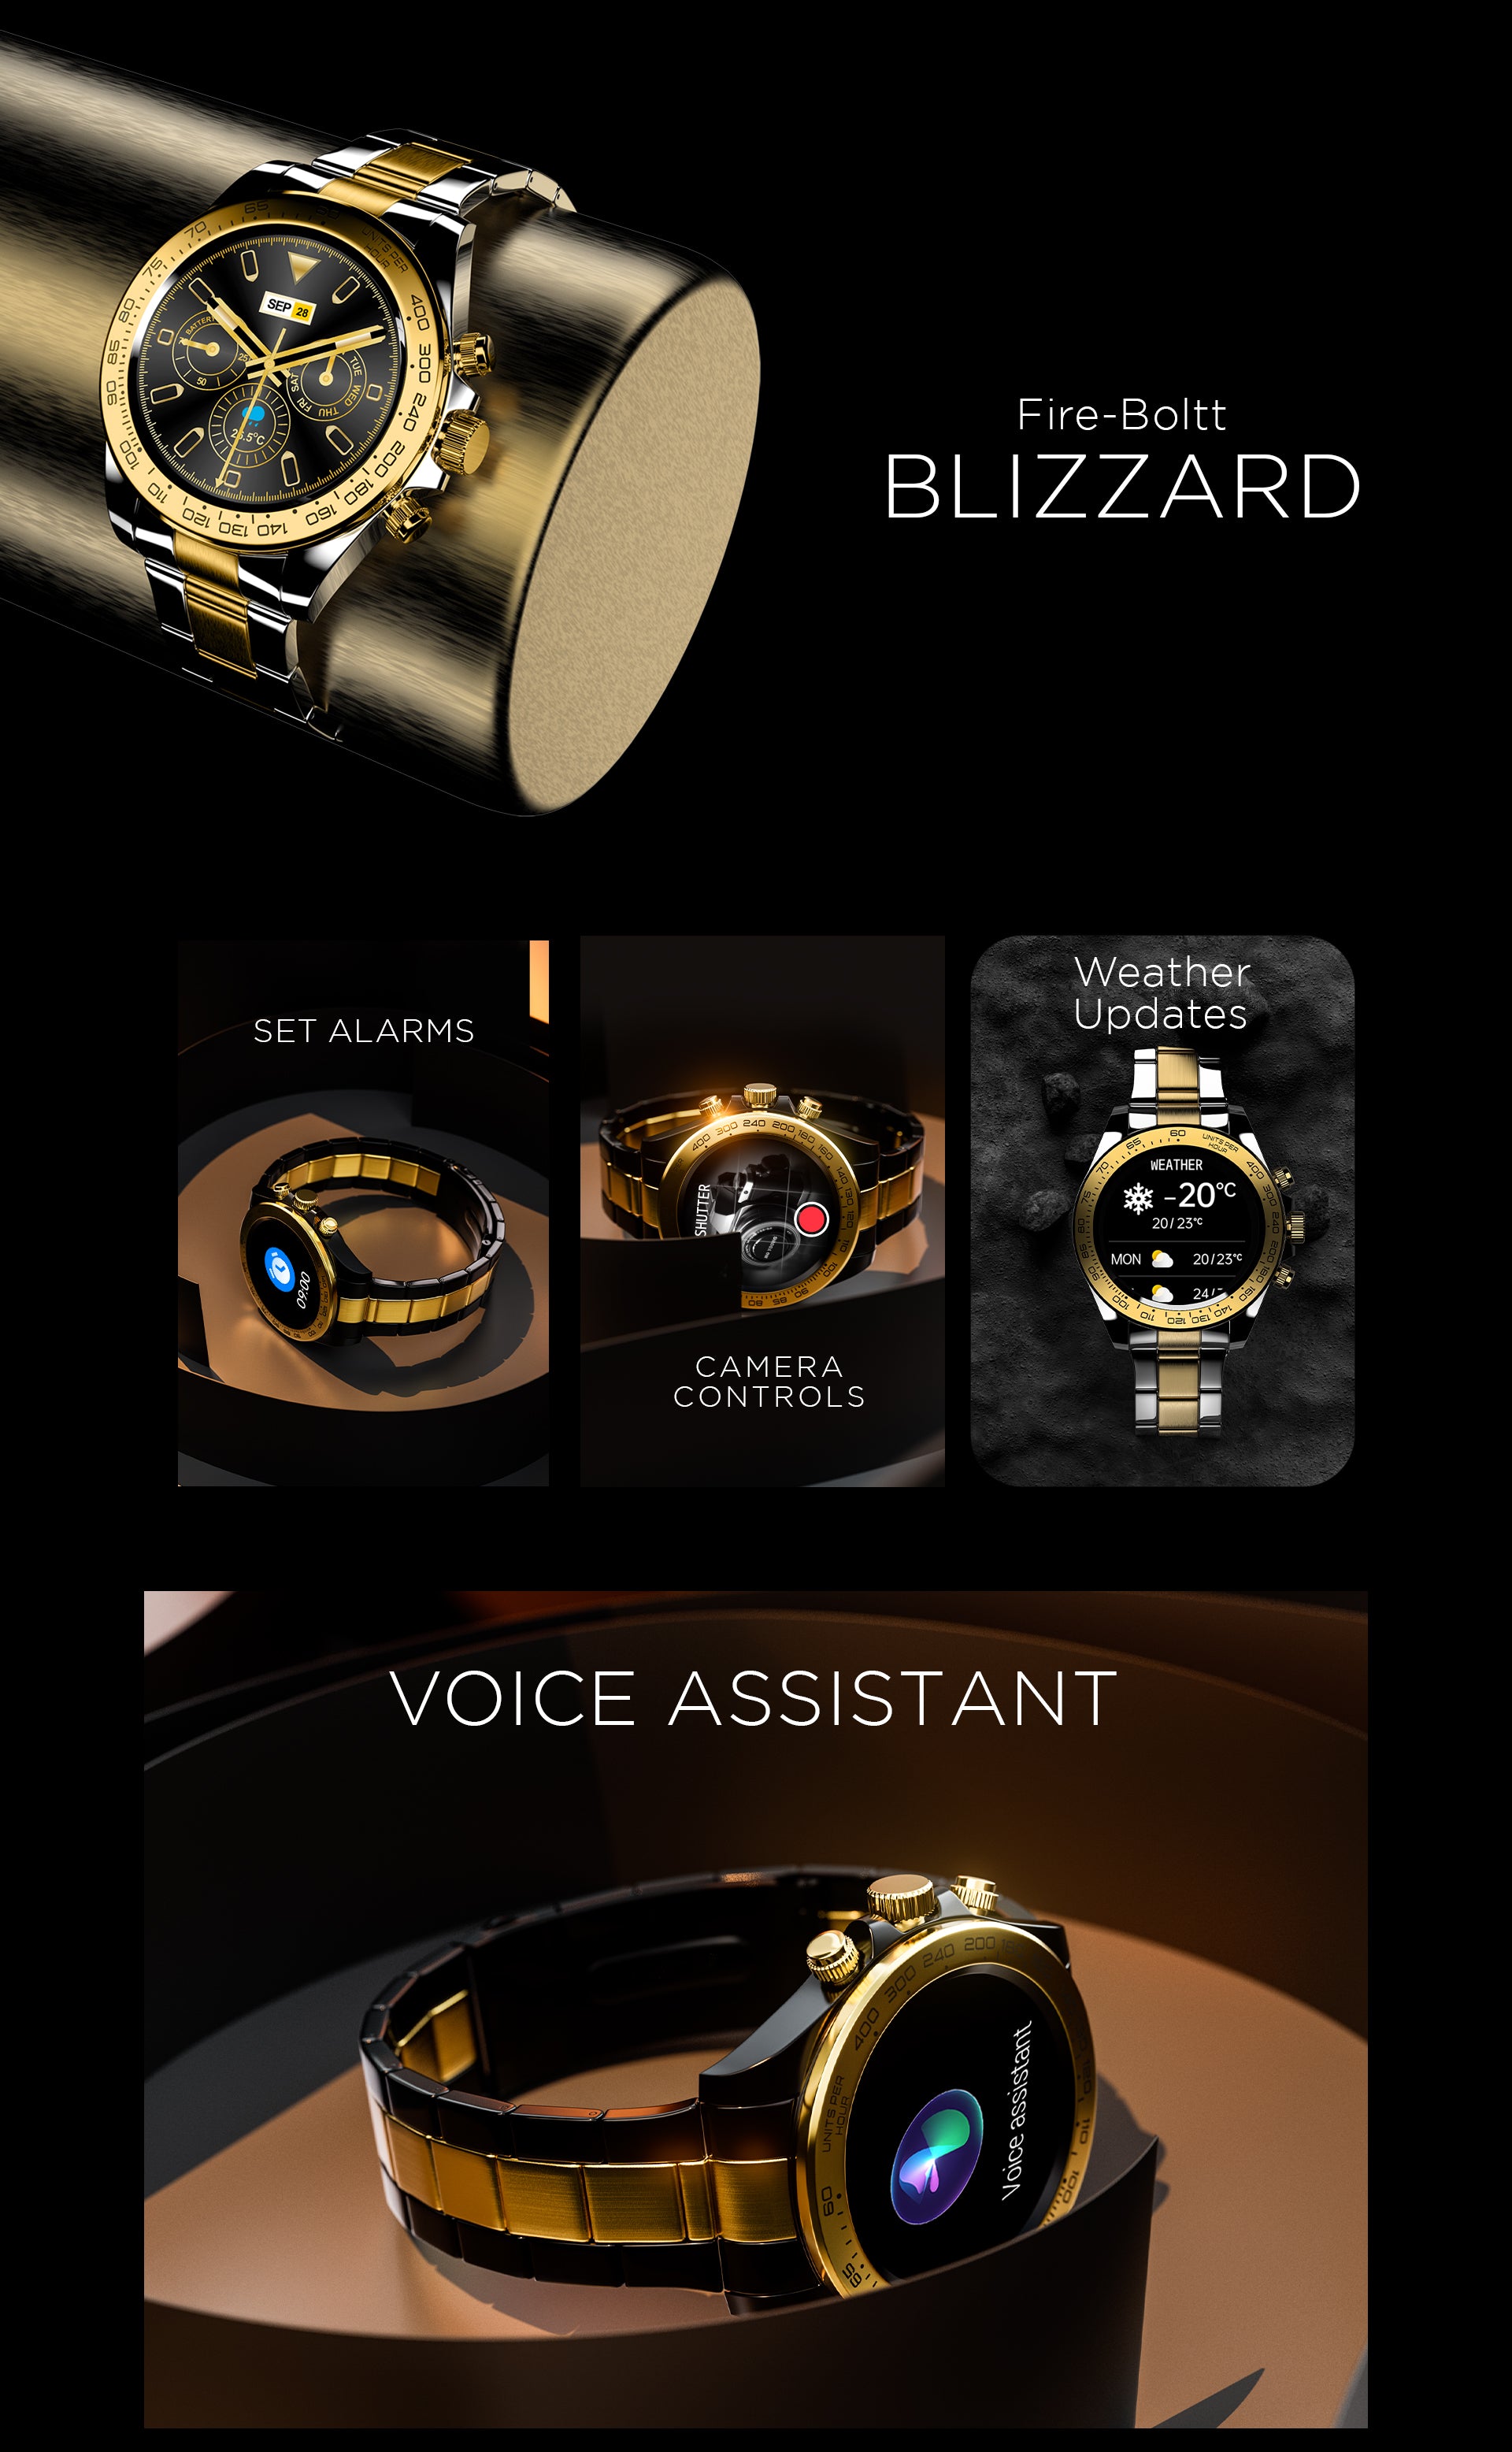 Fire-Boltt Blizzard Luxury Watch With Bluetooth Calling